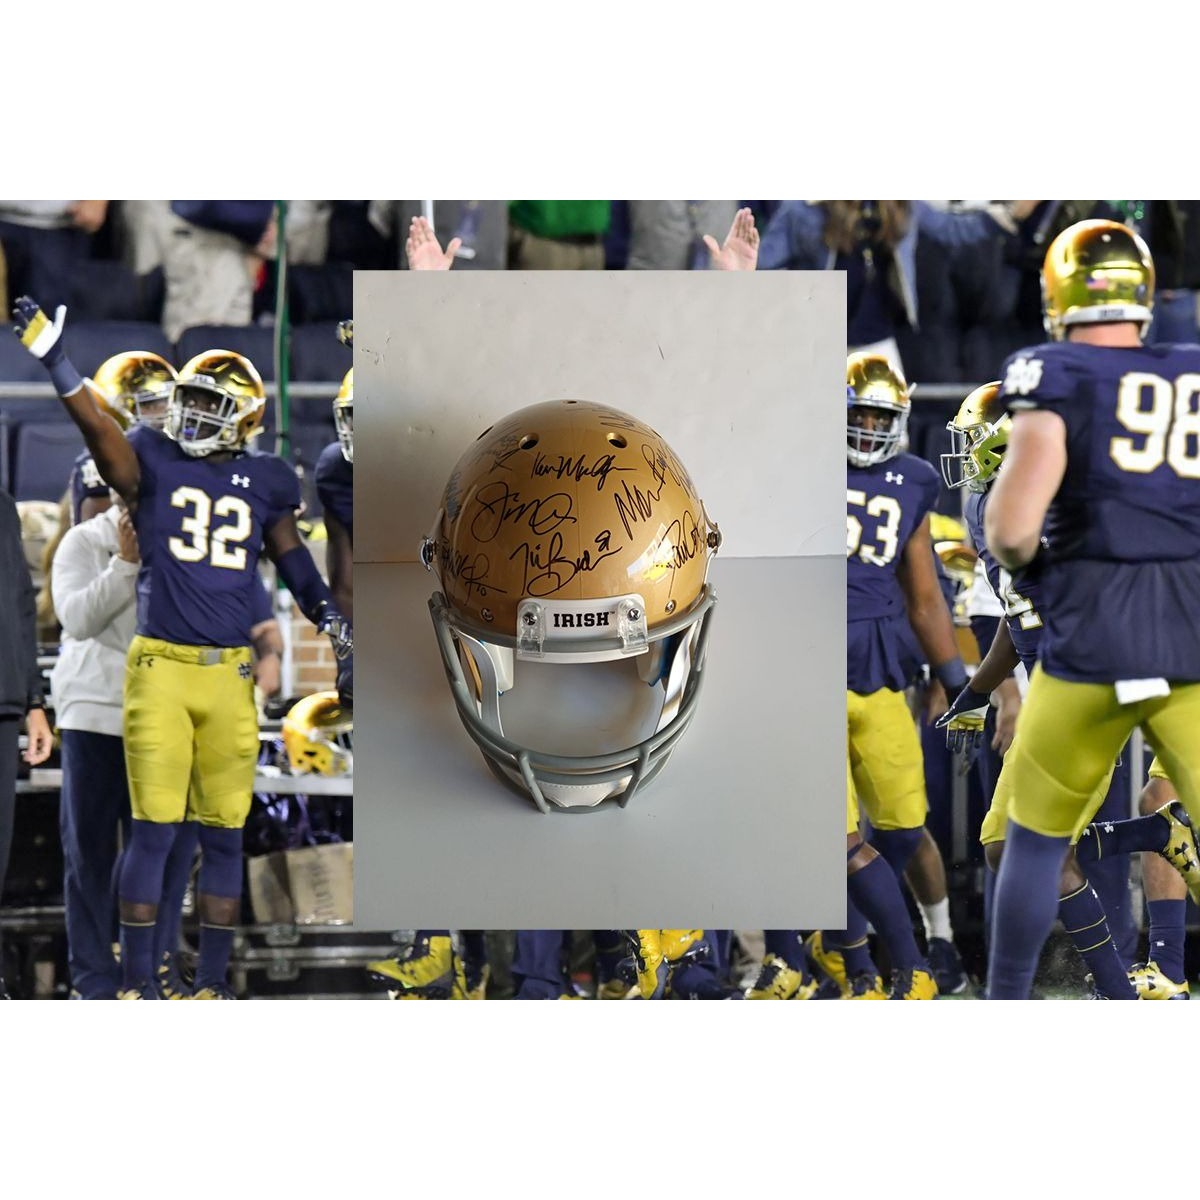 Notre Dame Fighting Irish all-time great football players signed replica helmet